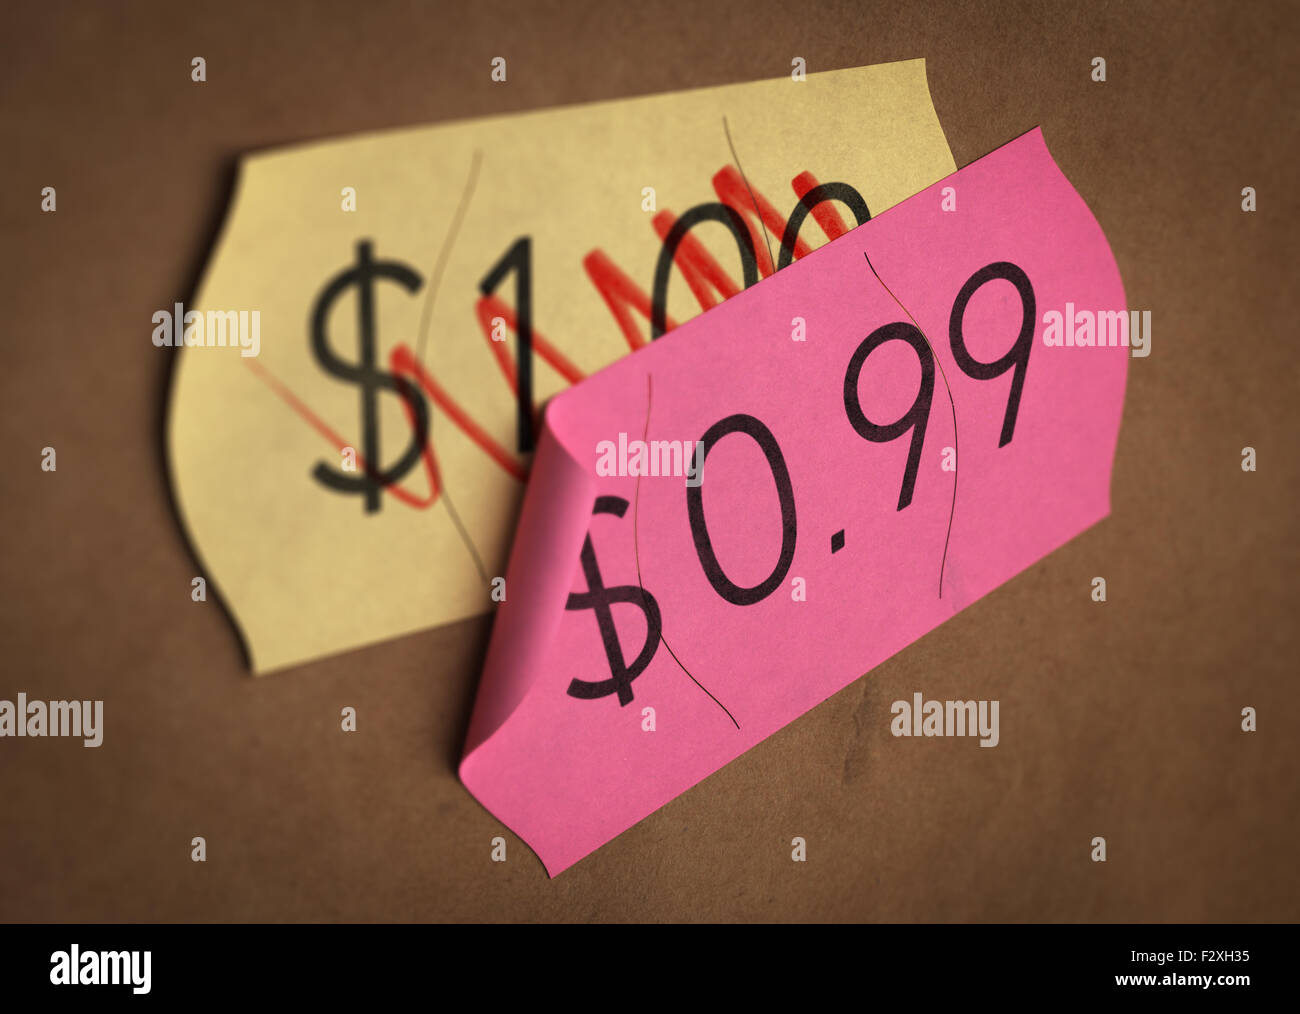 Psychological pricing printed on a pink label over a normal price. Concept image for illustration of prices psychological impact Stock Photo